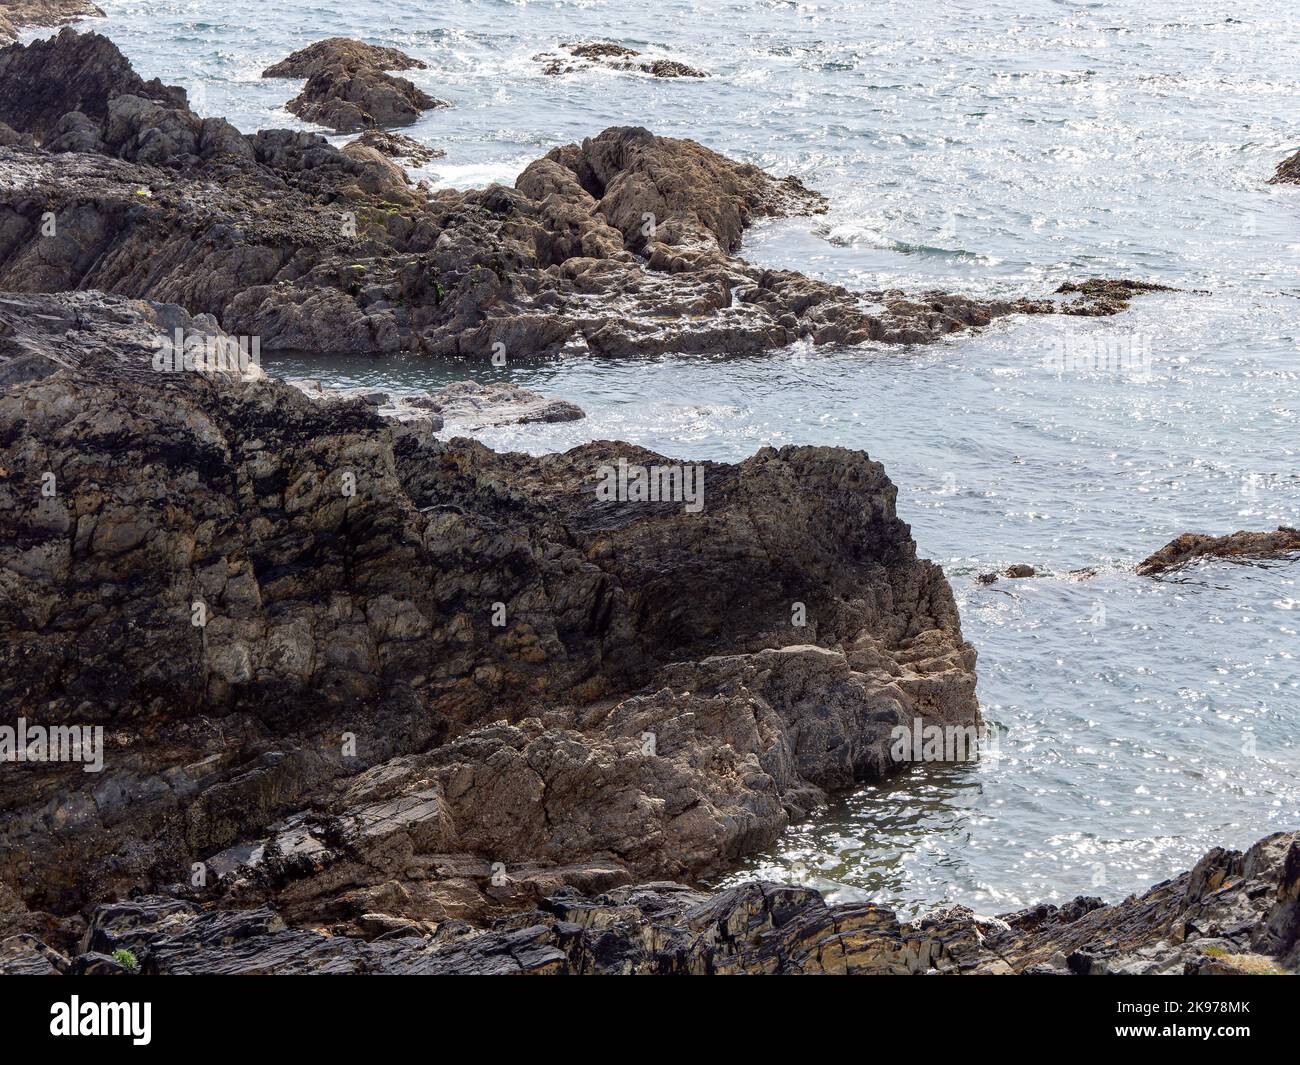 Exposed rocks on the shore. Seaside in sunny weather, rock formation near body of water. Stock Photo